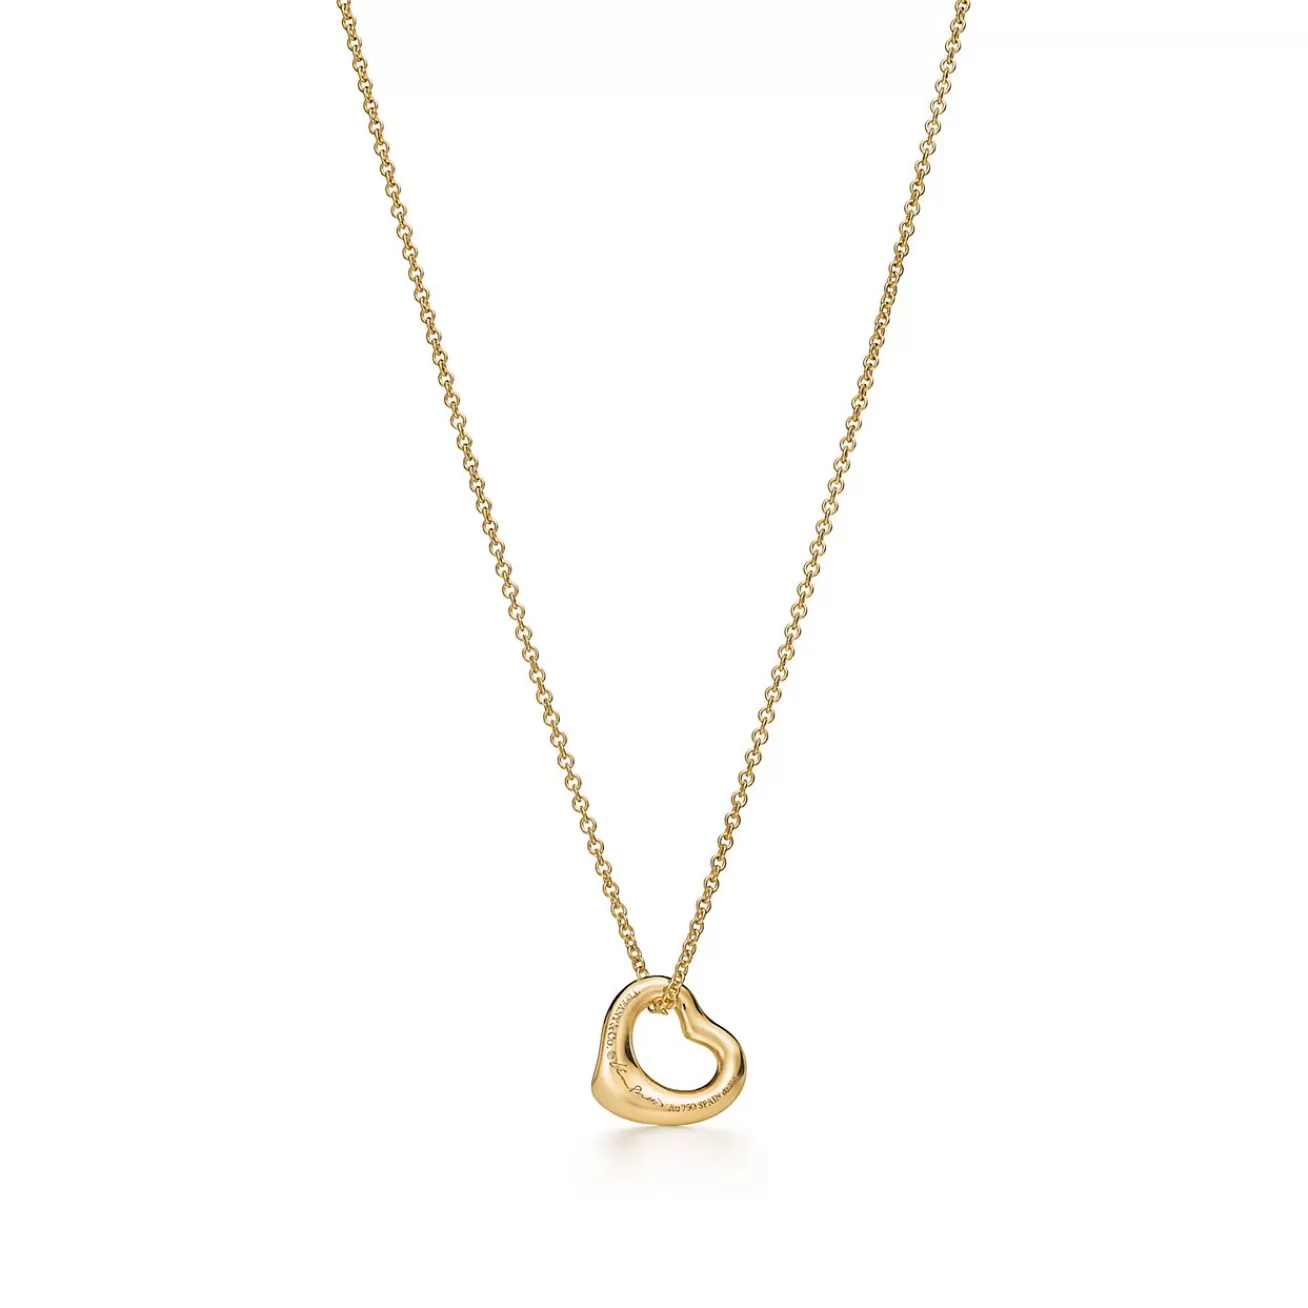 Tiffany & Co. Elsa Peretti® Open Heart Pendant in Yellow Gold with Diamonds | ^ Necklaces & Pendants | Gifts for Her